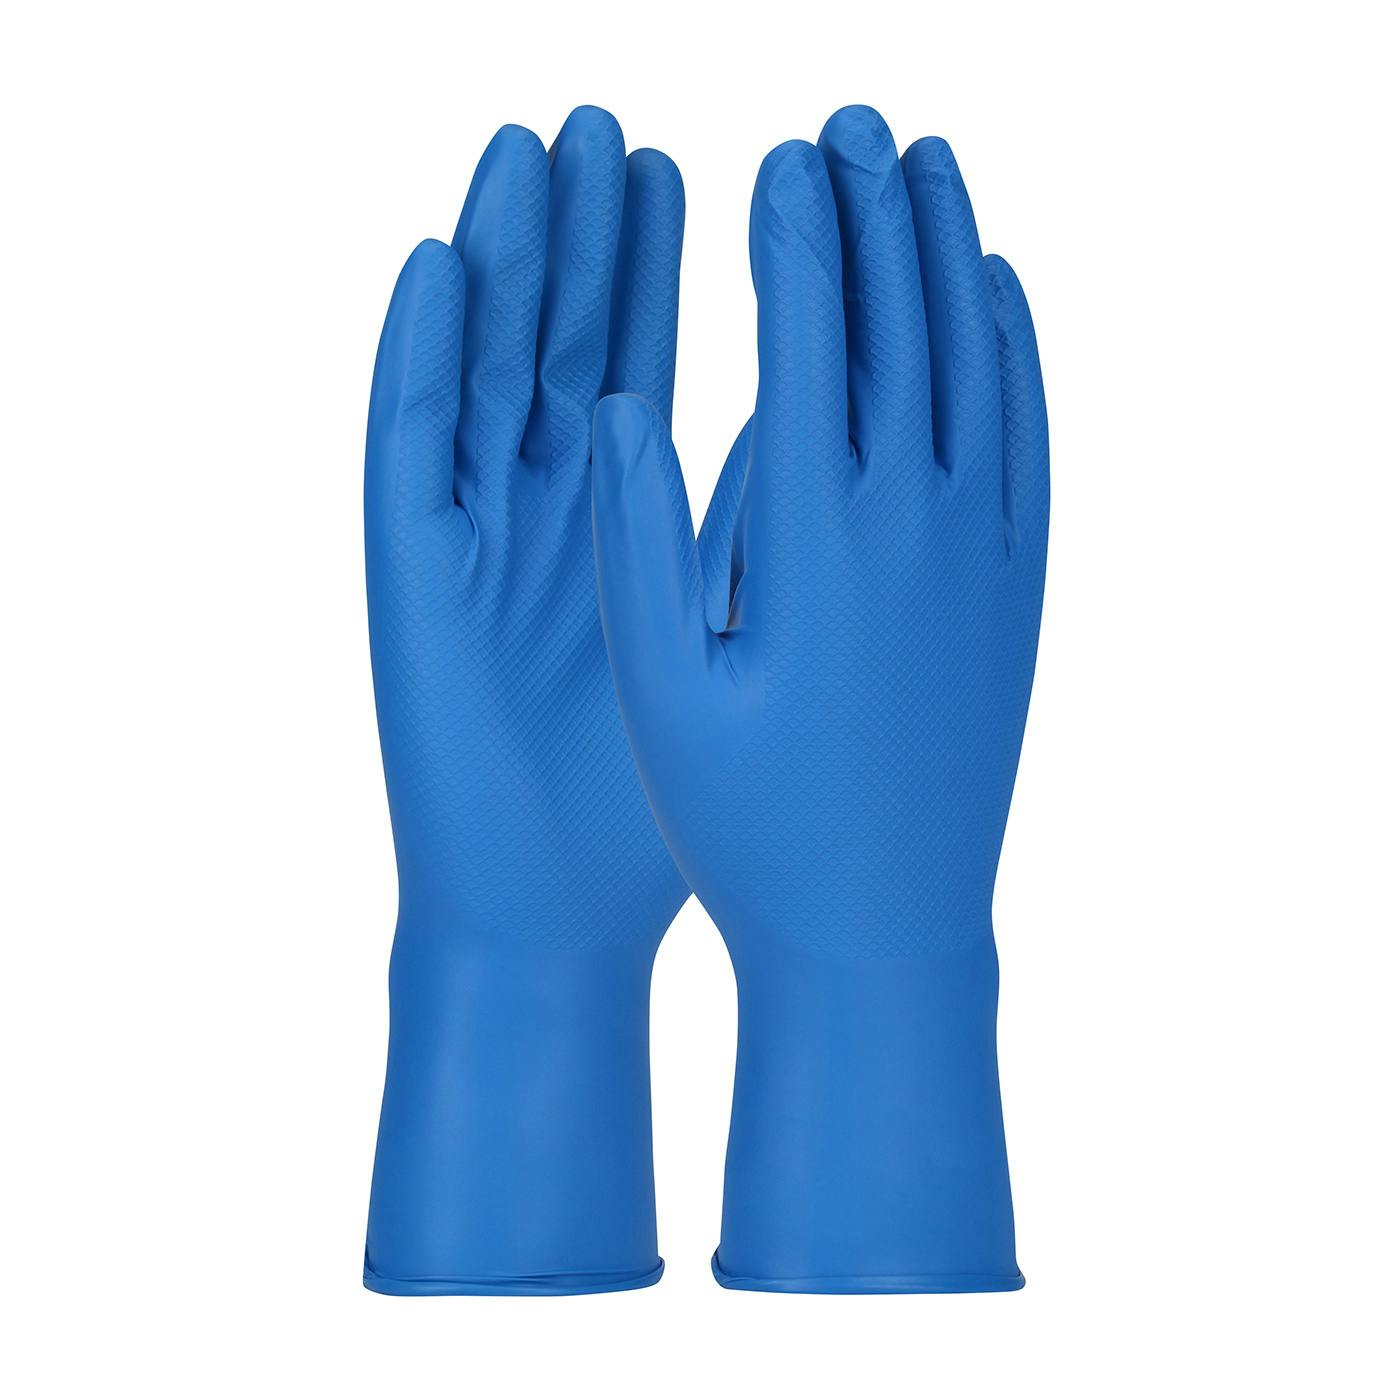 Grippaz™ Food Plus Extended Use Ambidextrous Nitrile Glove with Textured Fish Scale Grip - 8 Mil (67-308)_0